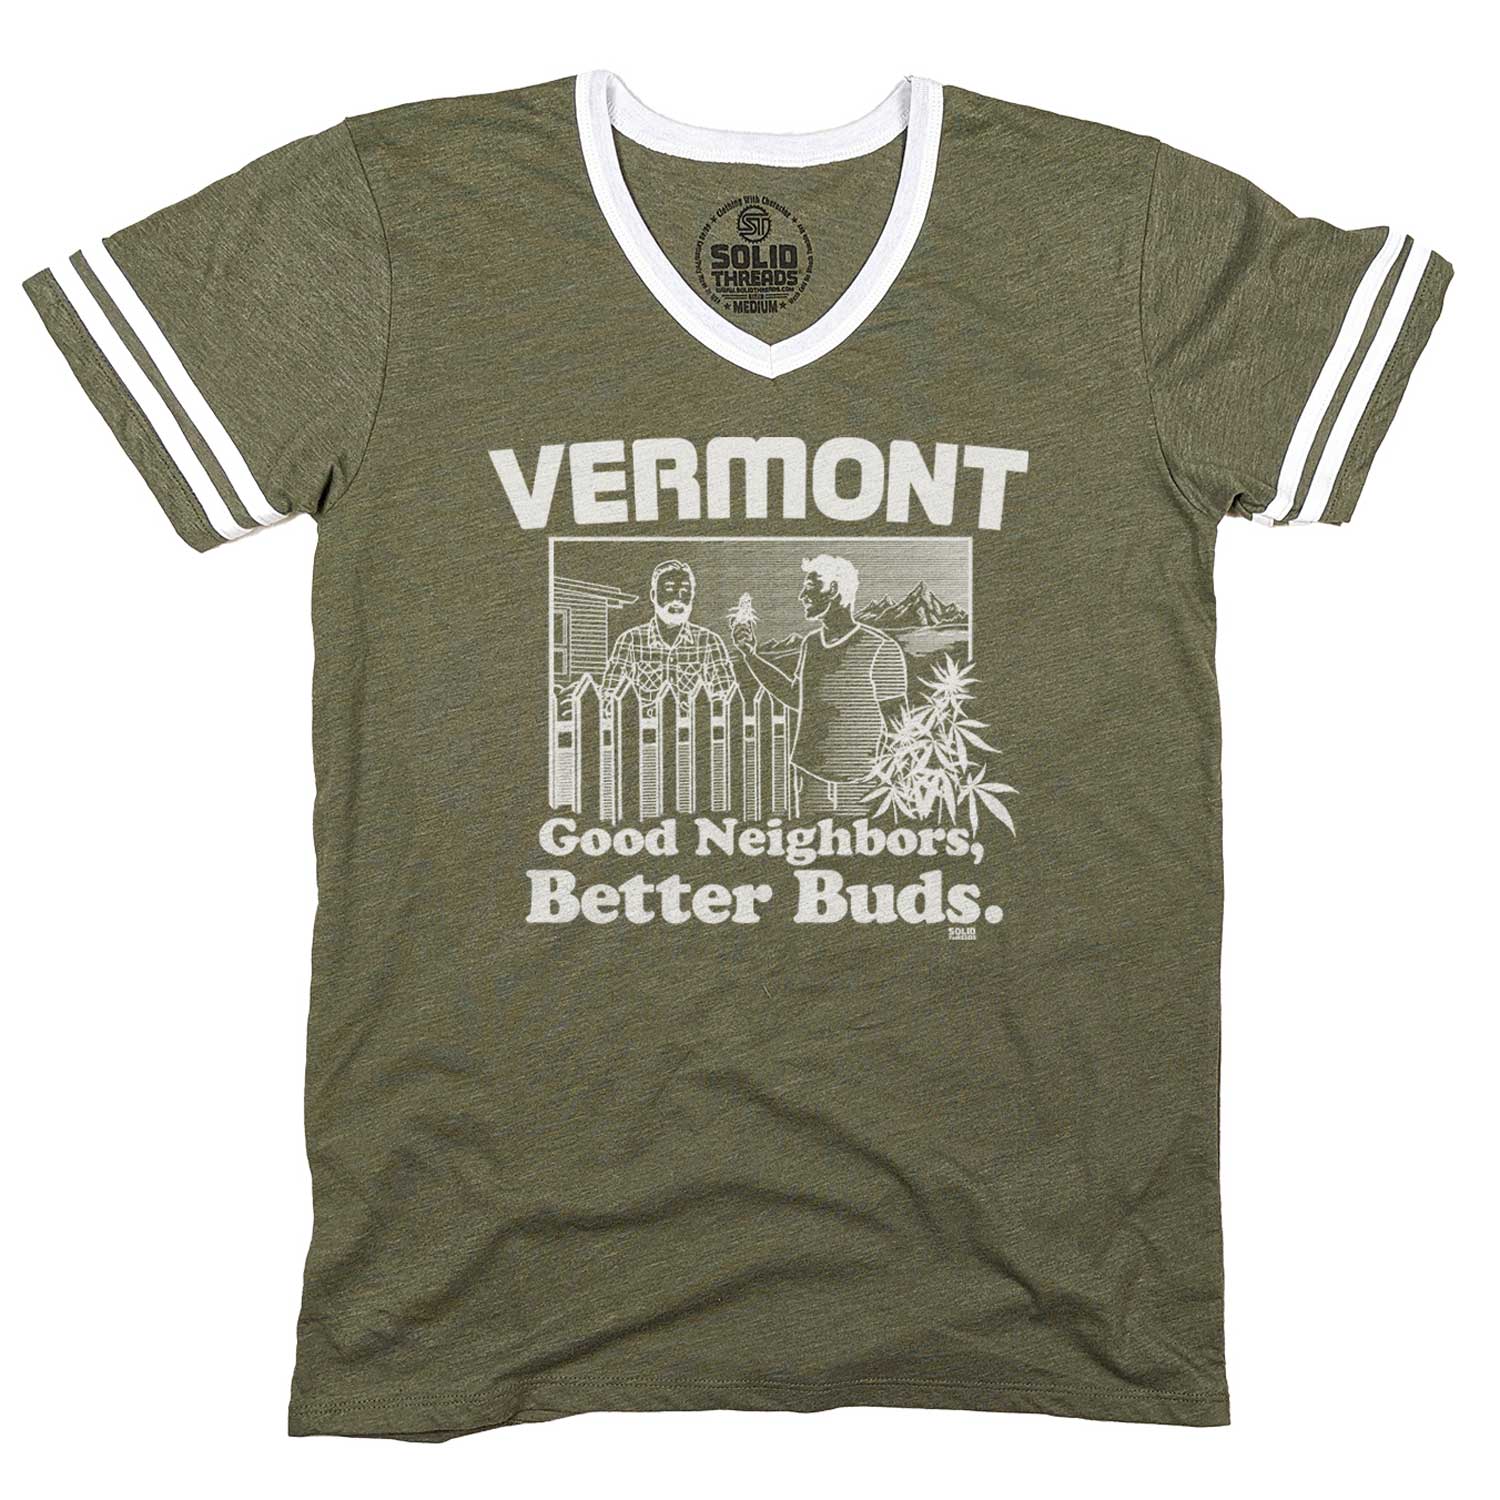 Men's Vermont Better Buds Vintage Graphic V-Neck Tee | Funny Marijuana T-shirt | Solid Threads